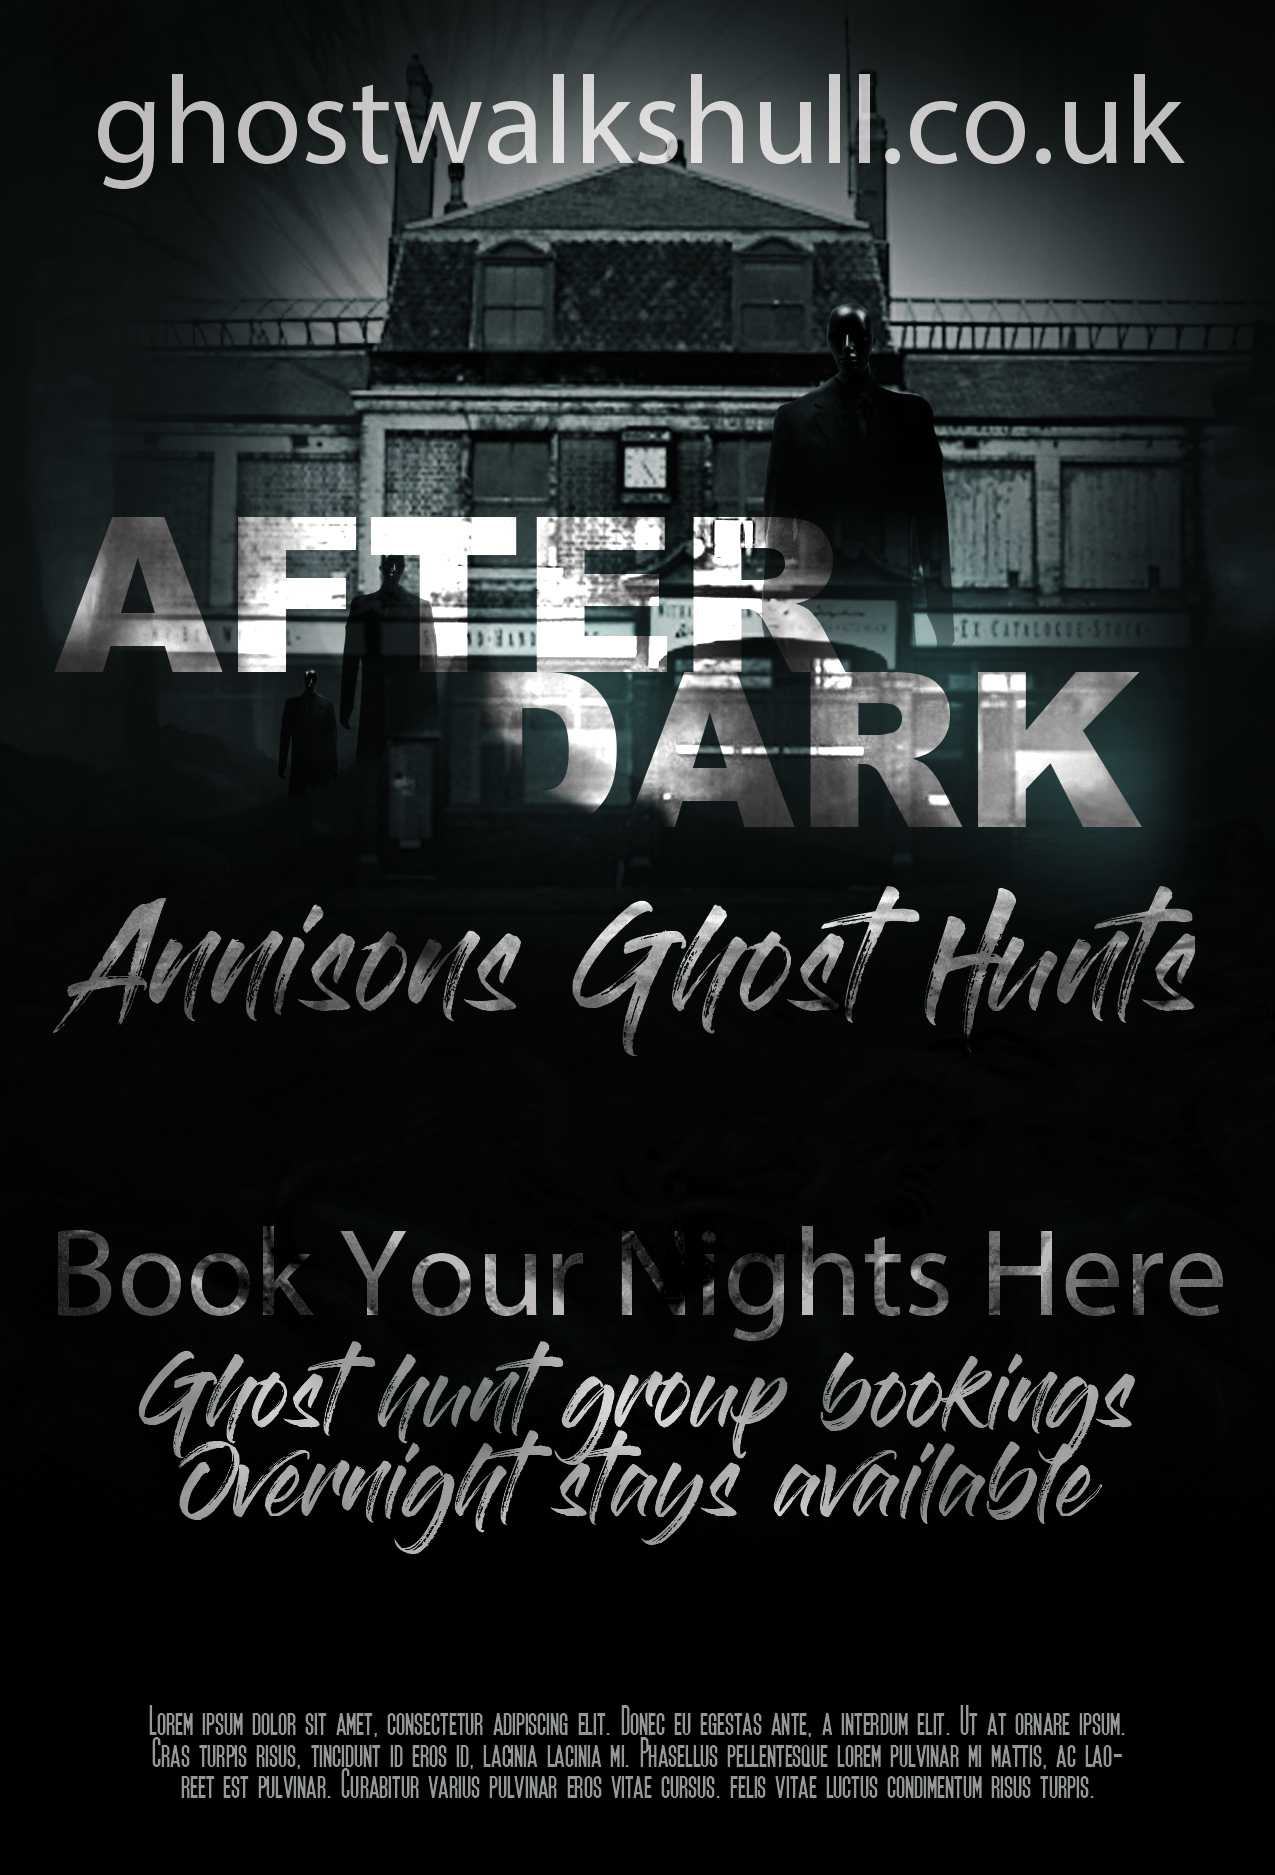 Annisons Ghost Hunt Bookings